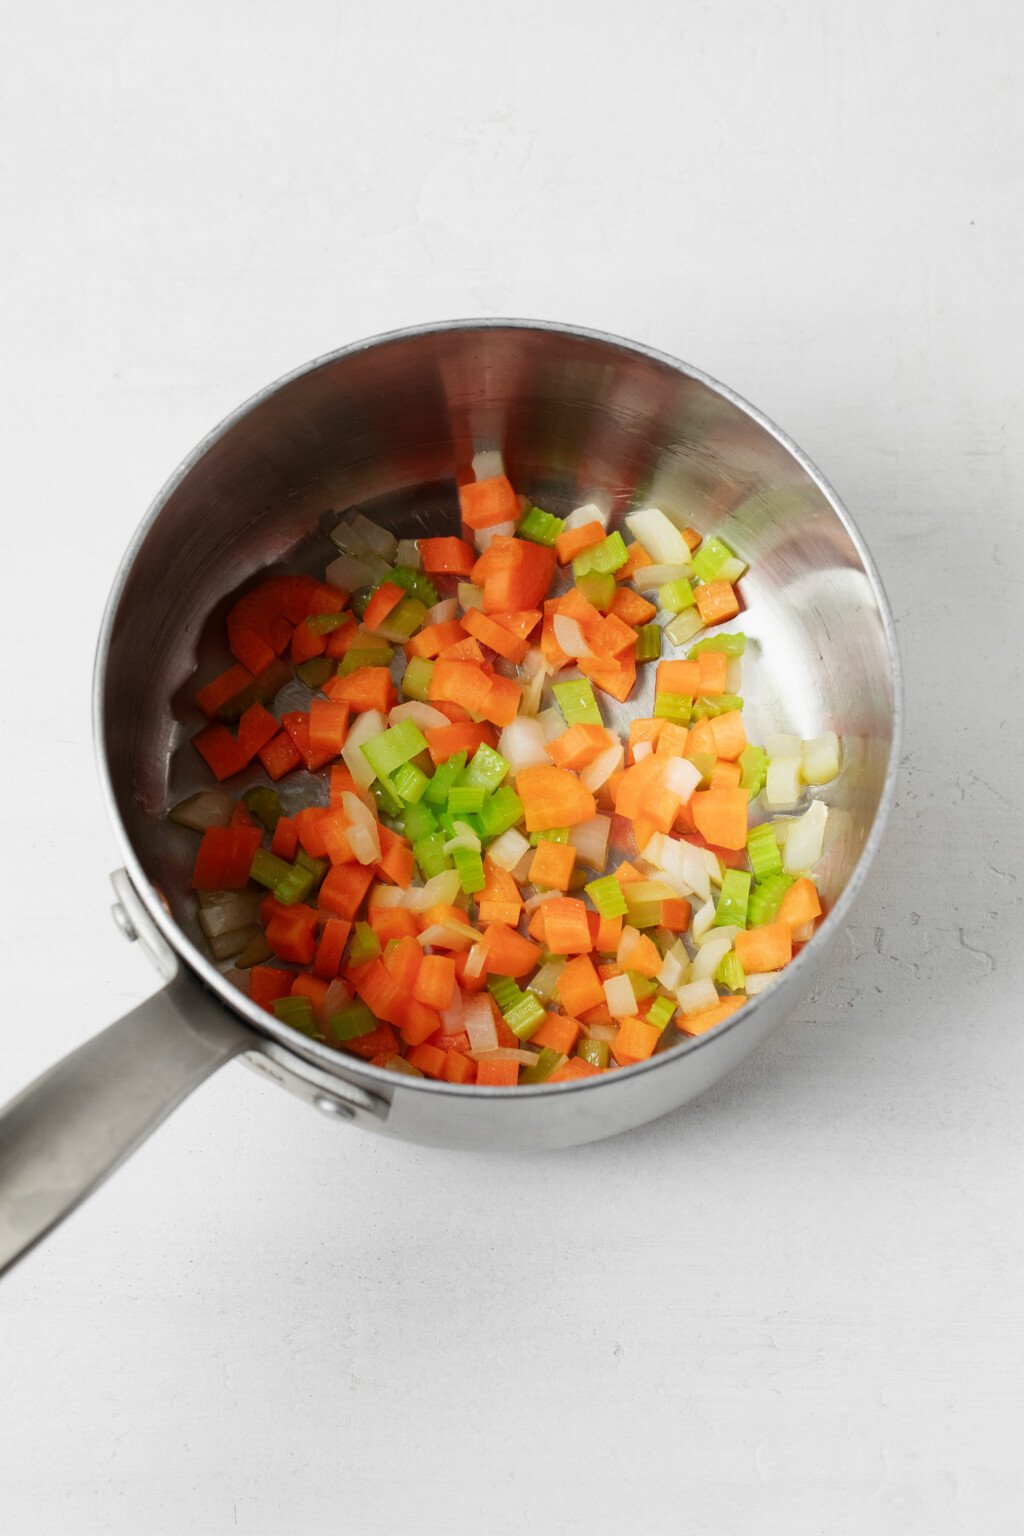 A mirepoix mix has been put into a metal saucepan, which rests on a white surface.